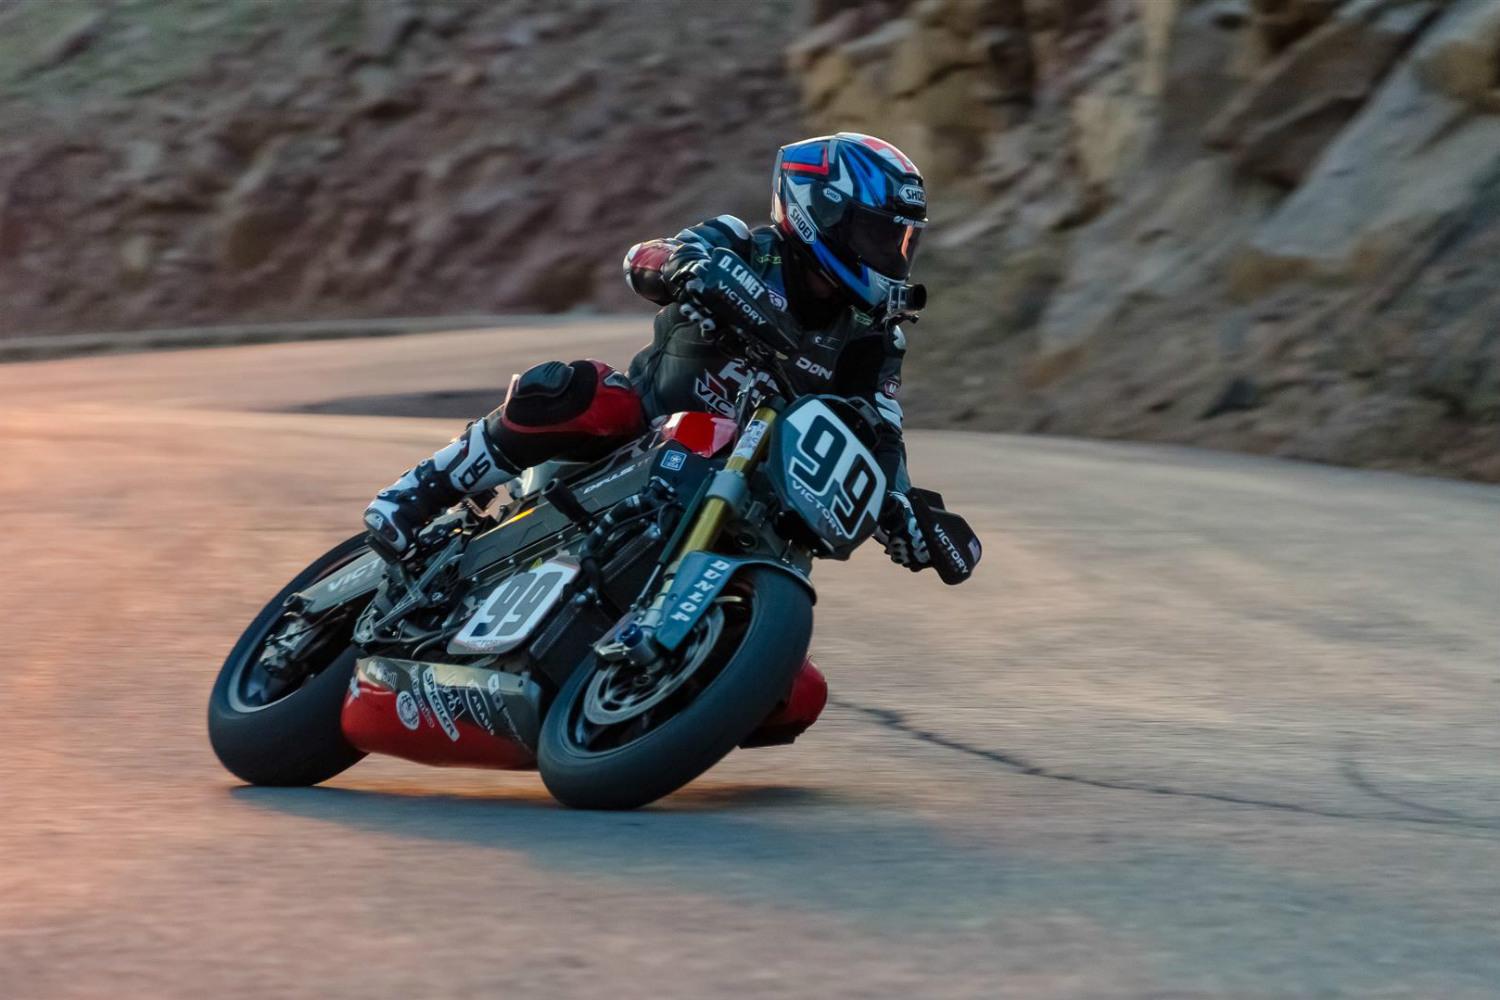 victory motorcycles empulse rr takes first at pikes peak ppihc